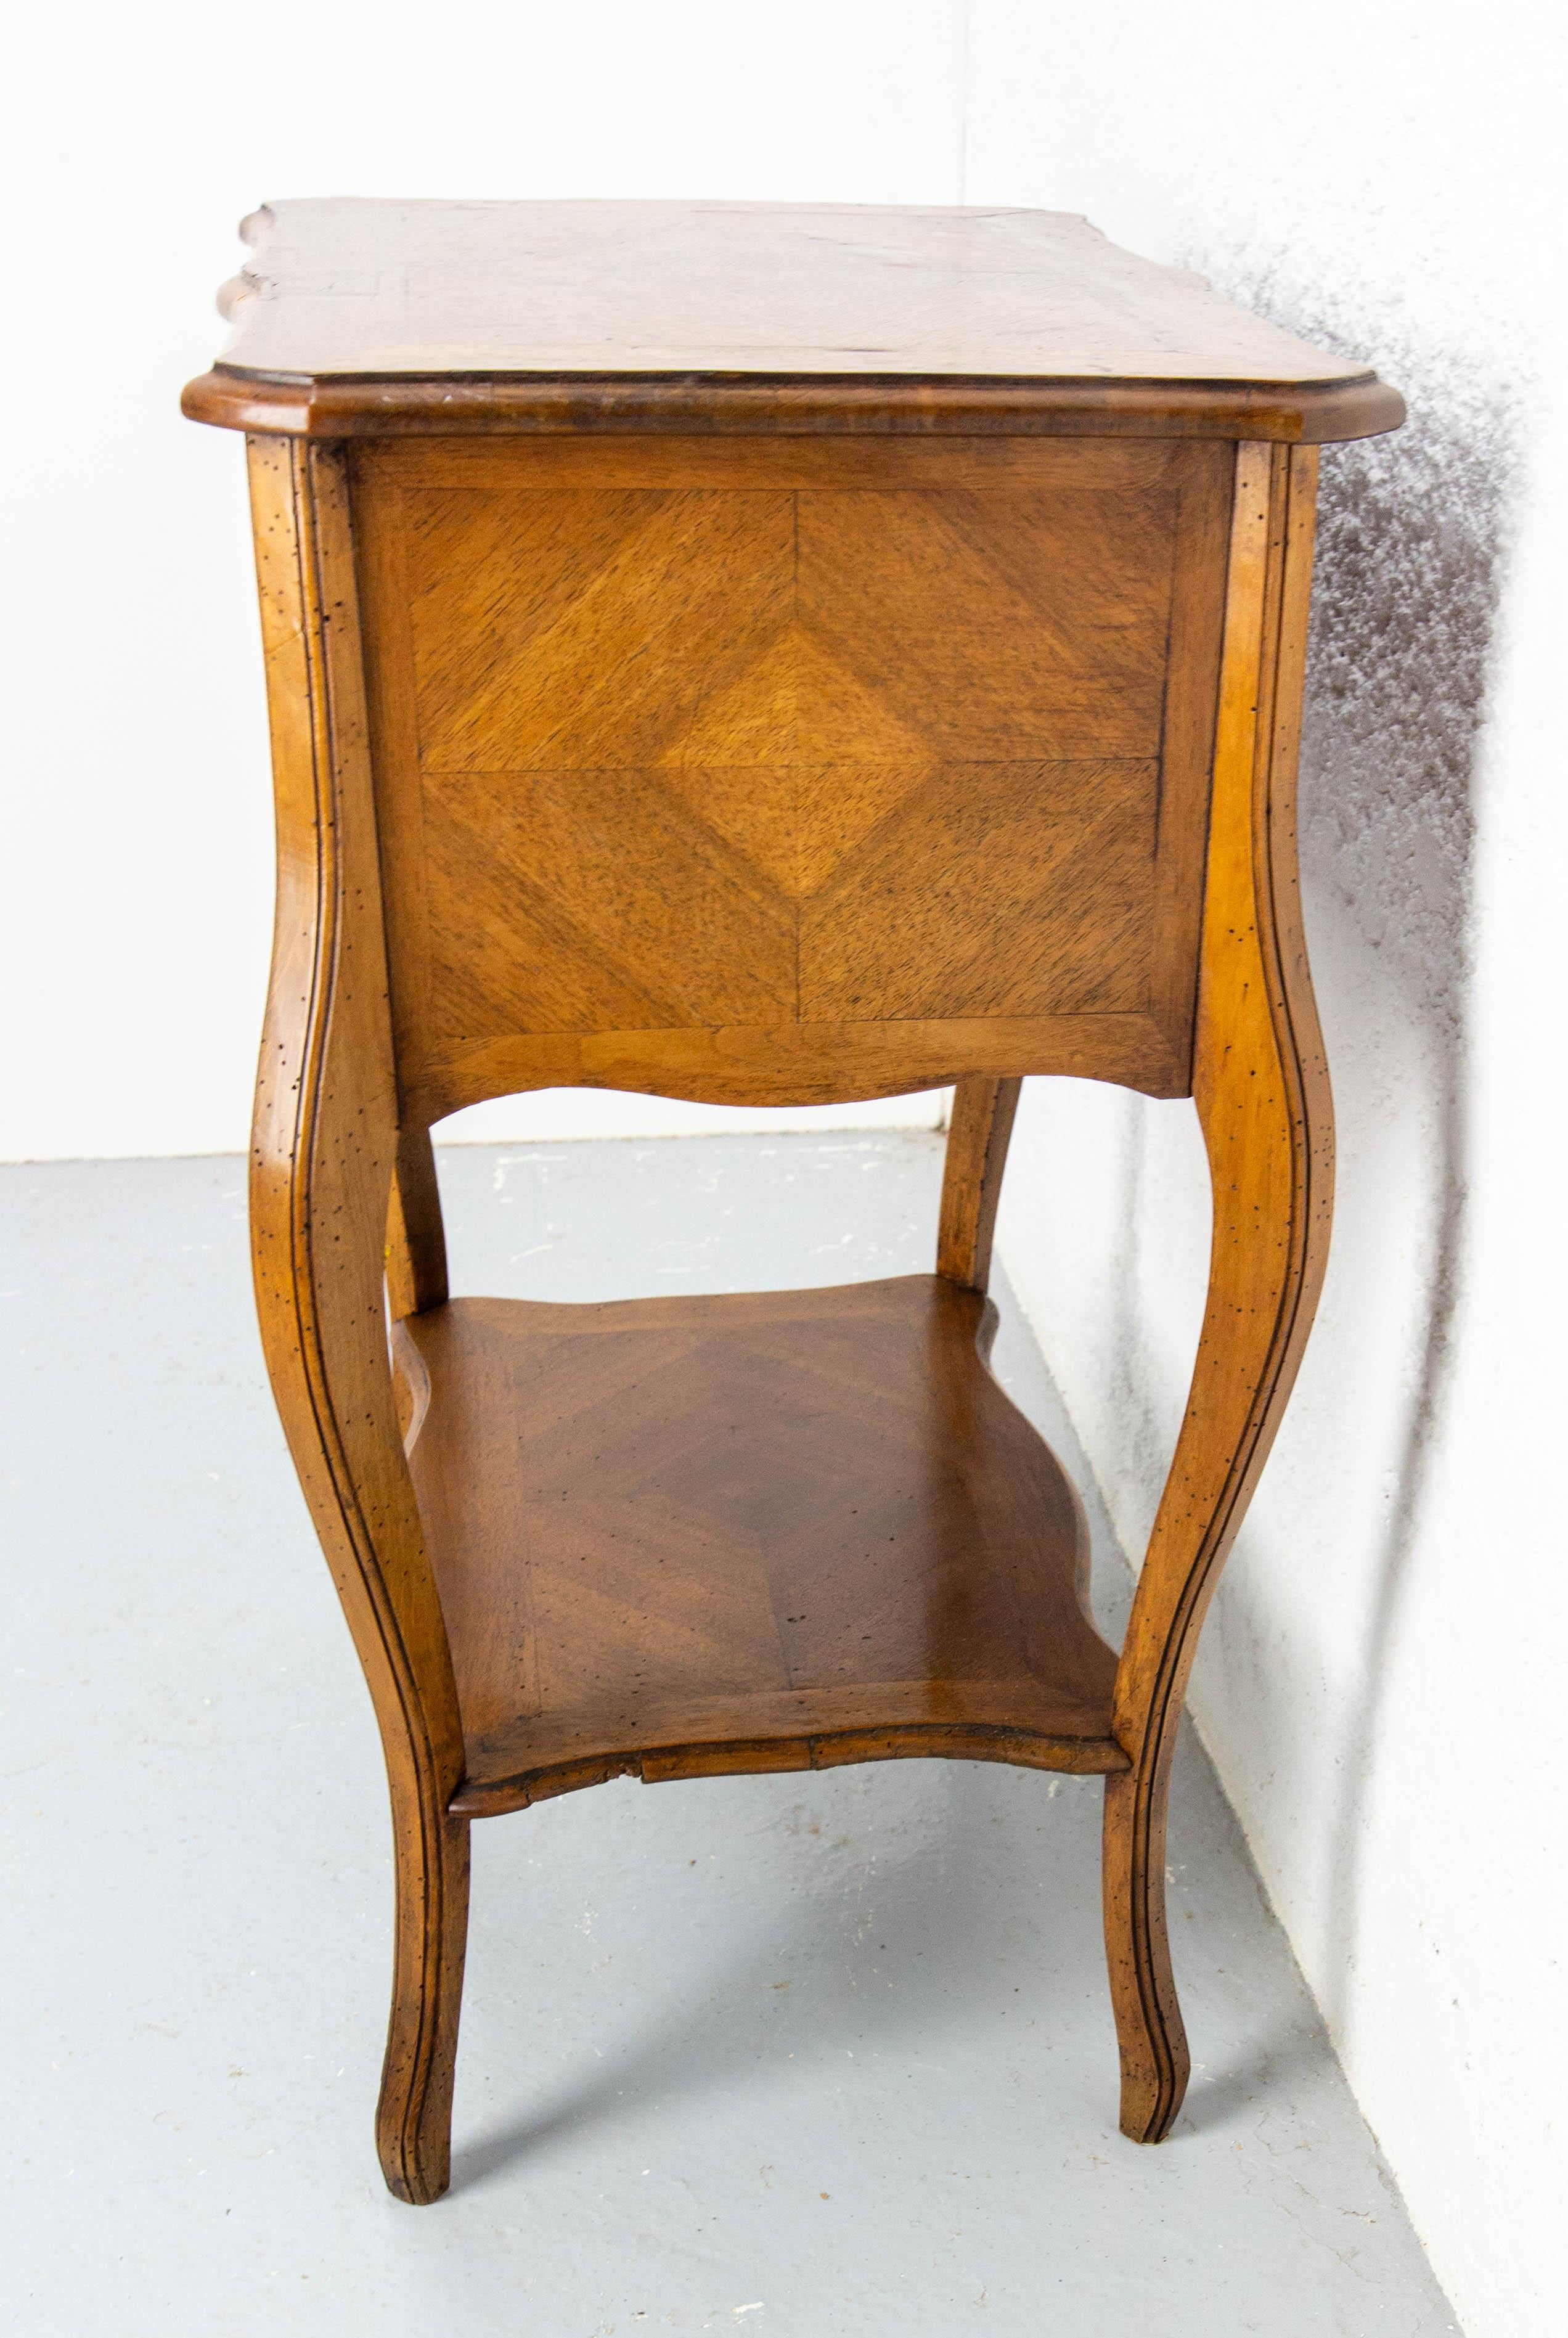 Early 20th Century French Walnut Sewing Table in the Louis XV Style, circa 1900 For Sale